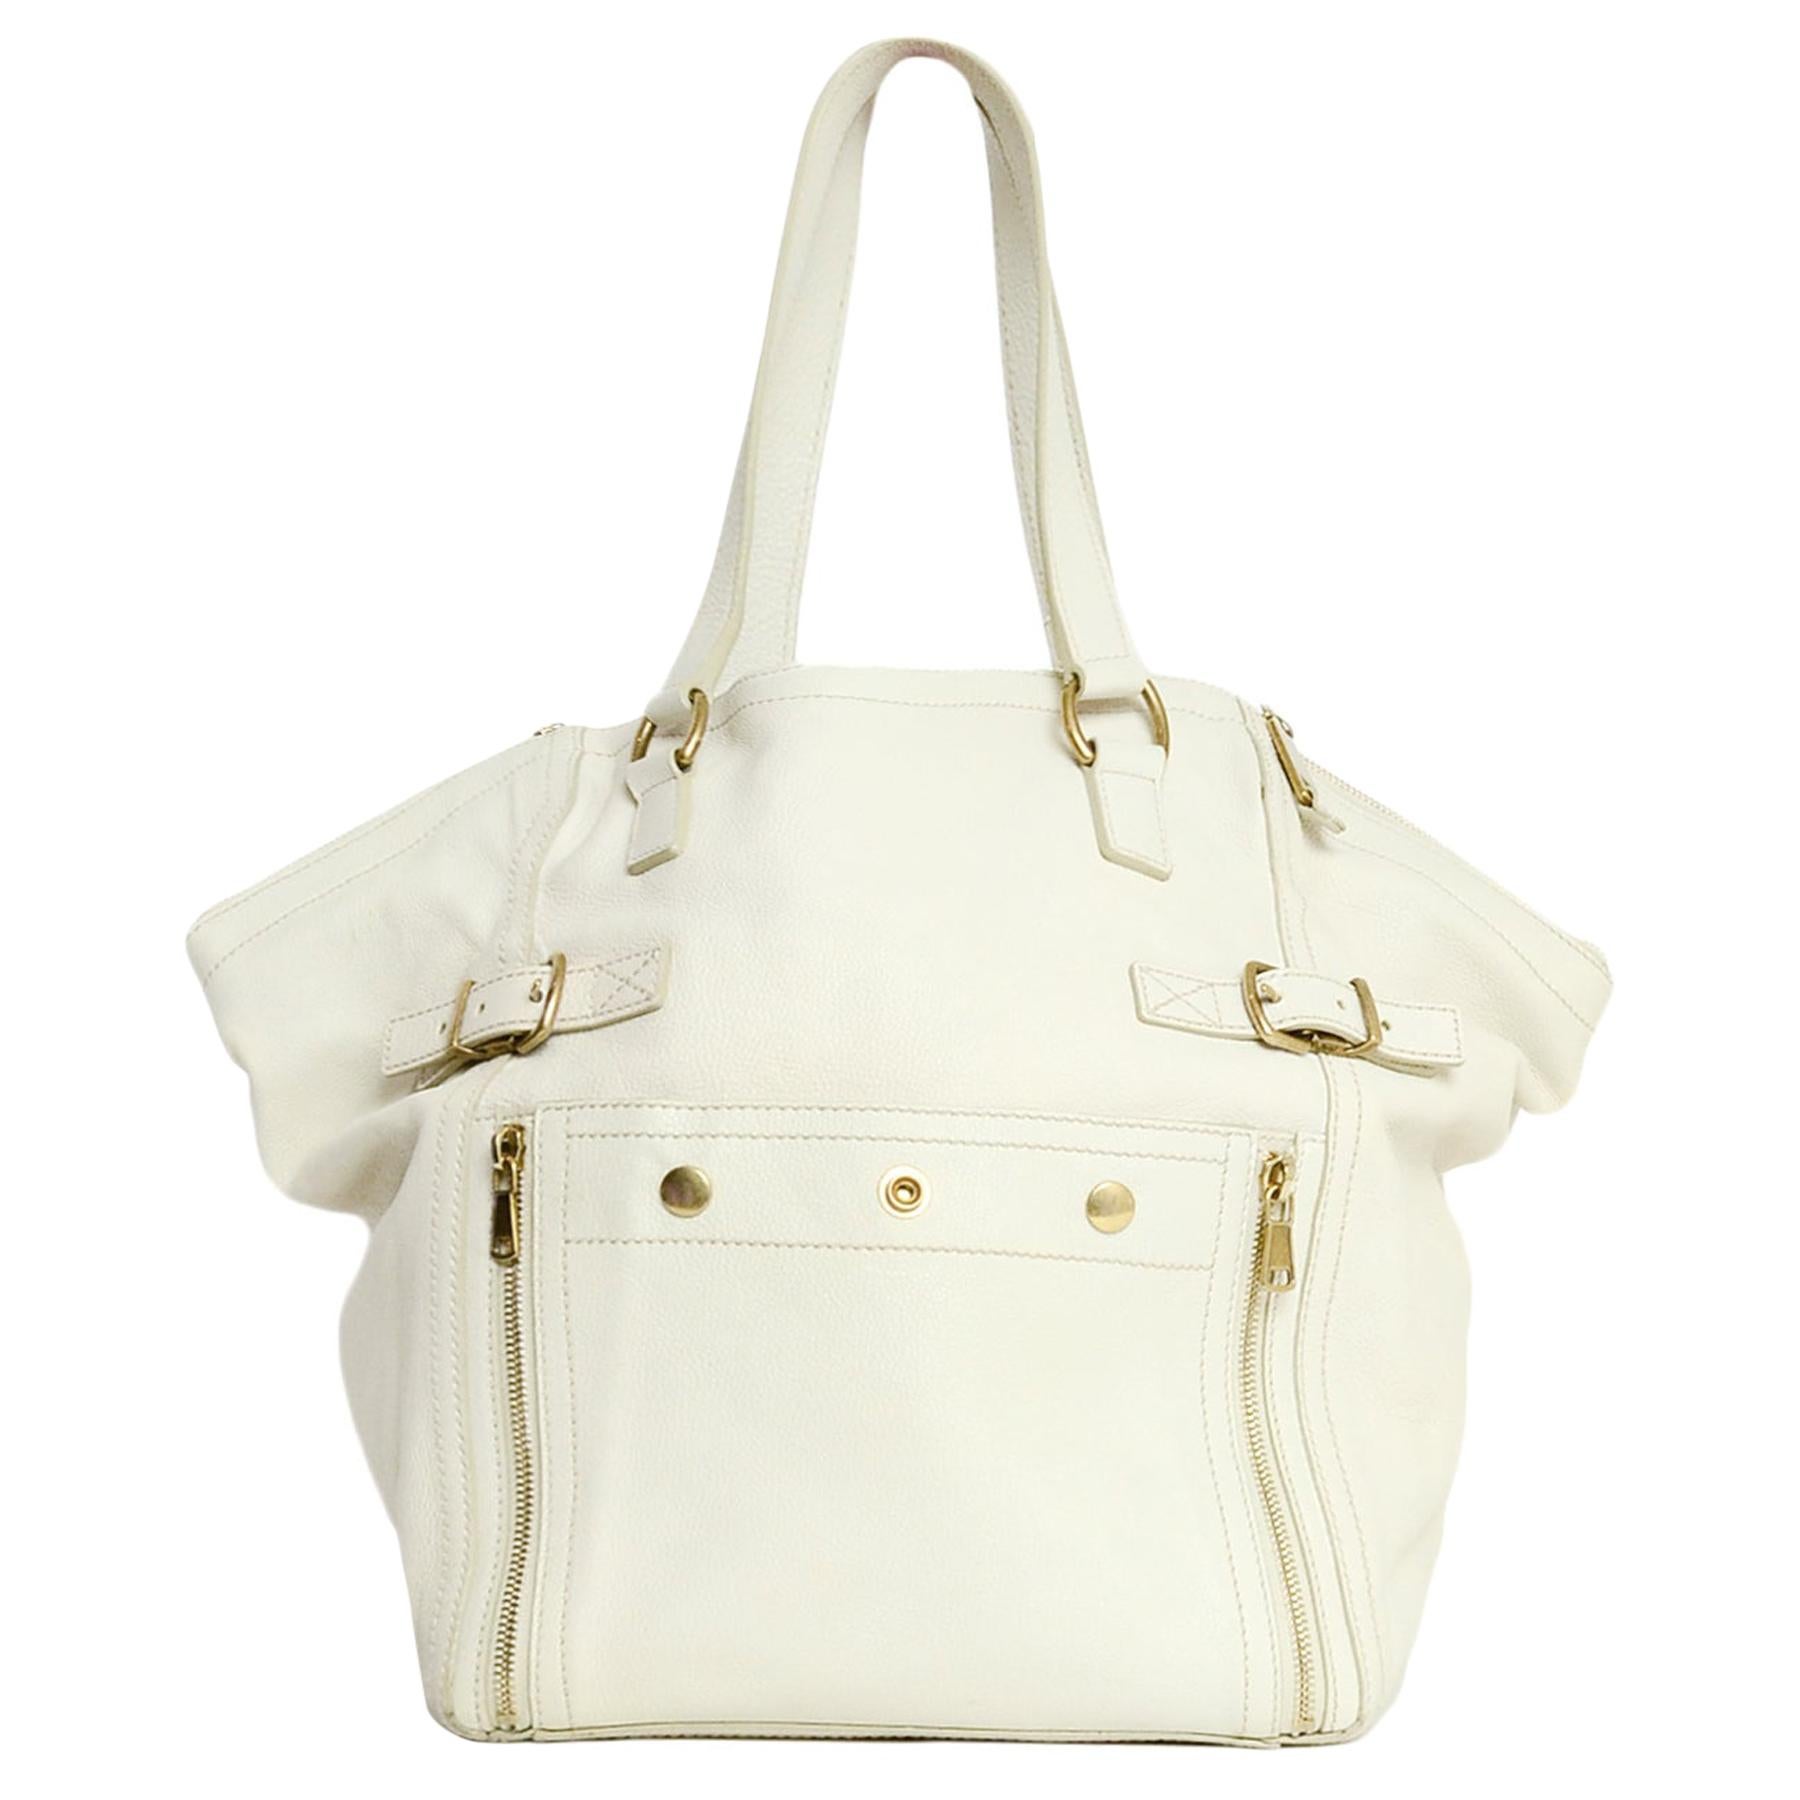 Yves Saint Laurent Ivory Leather Large Downtown Tote Bag rt $1, 795